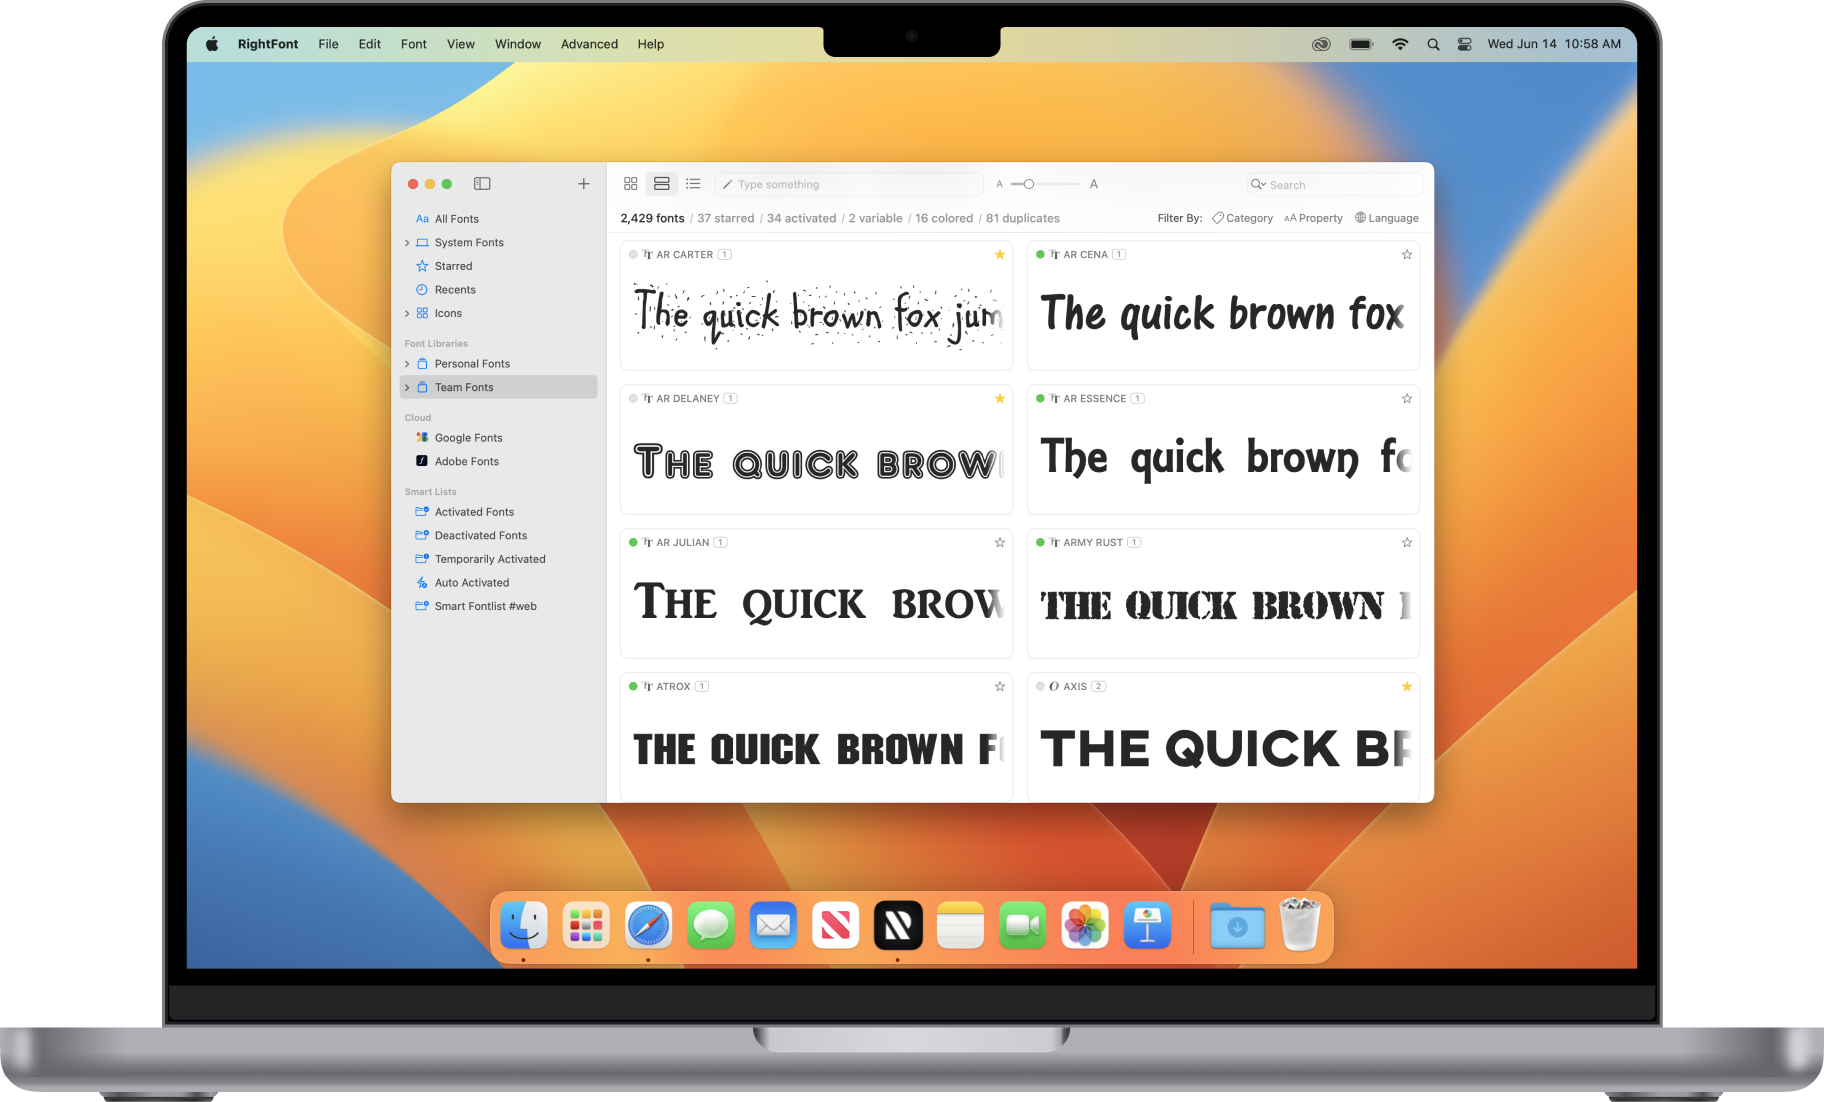 RightFont - Best font manager for macOS